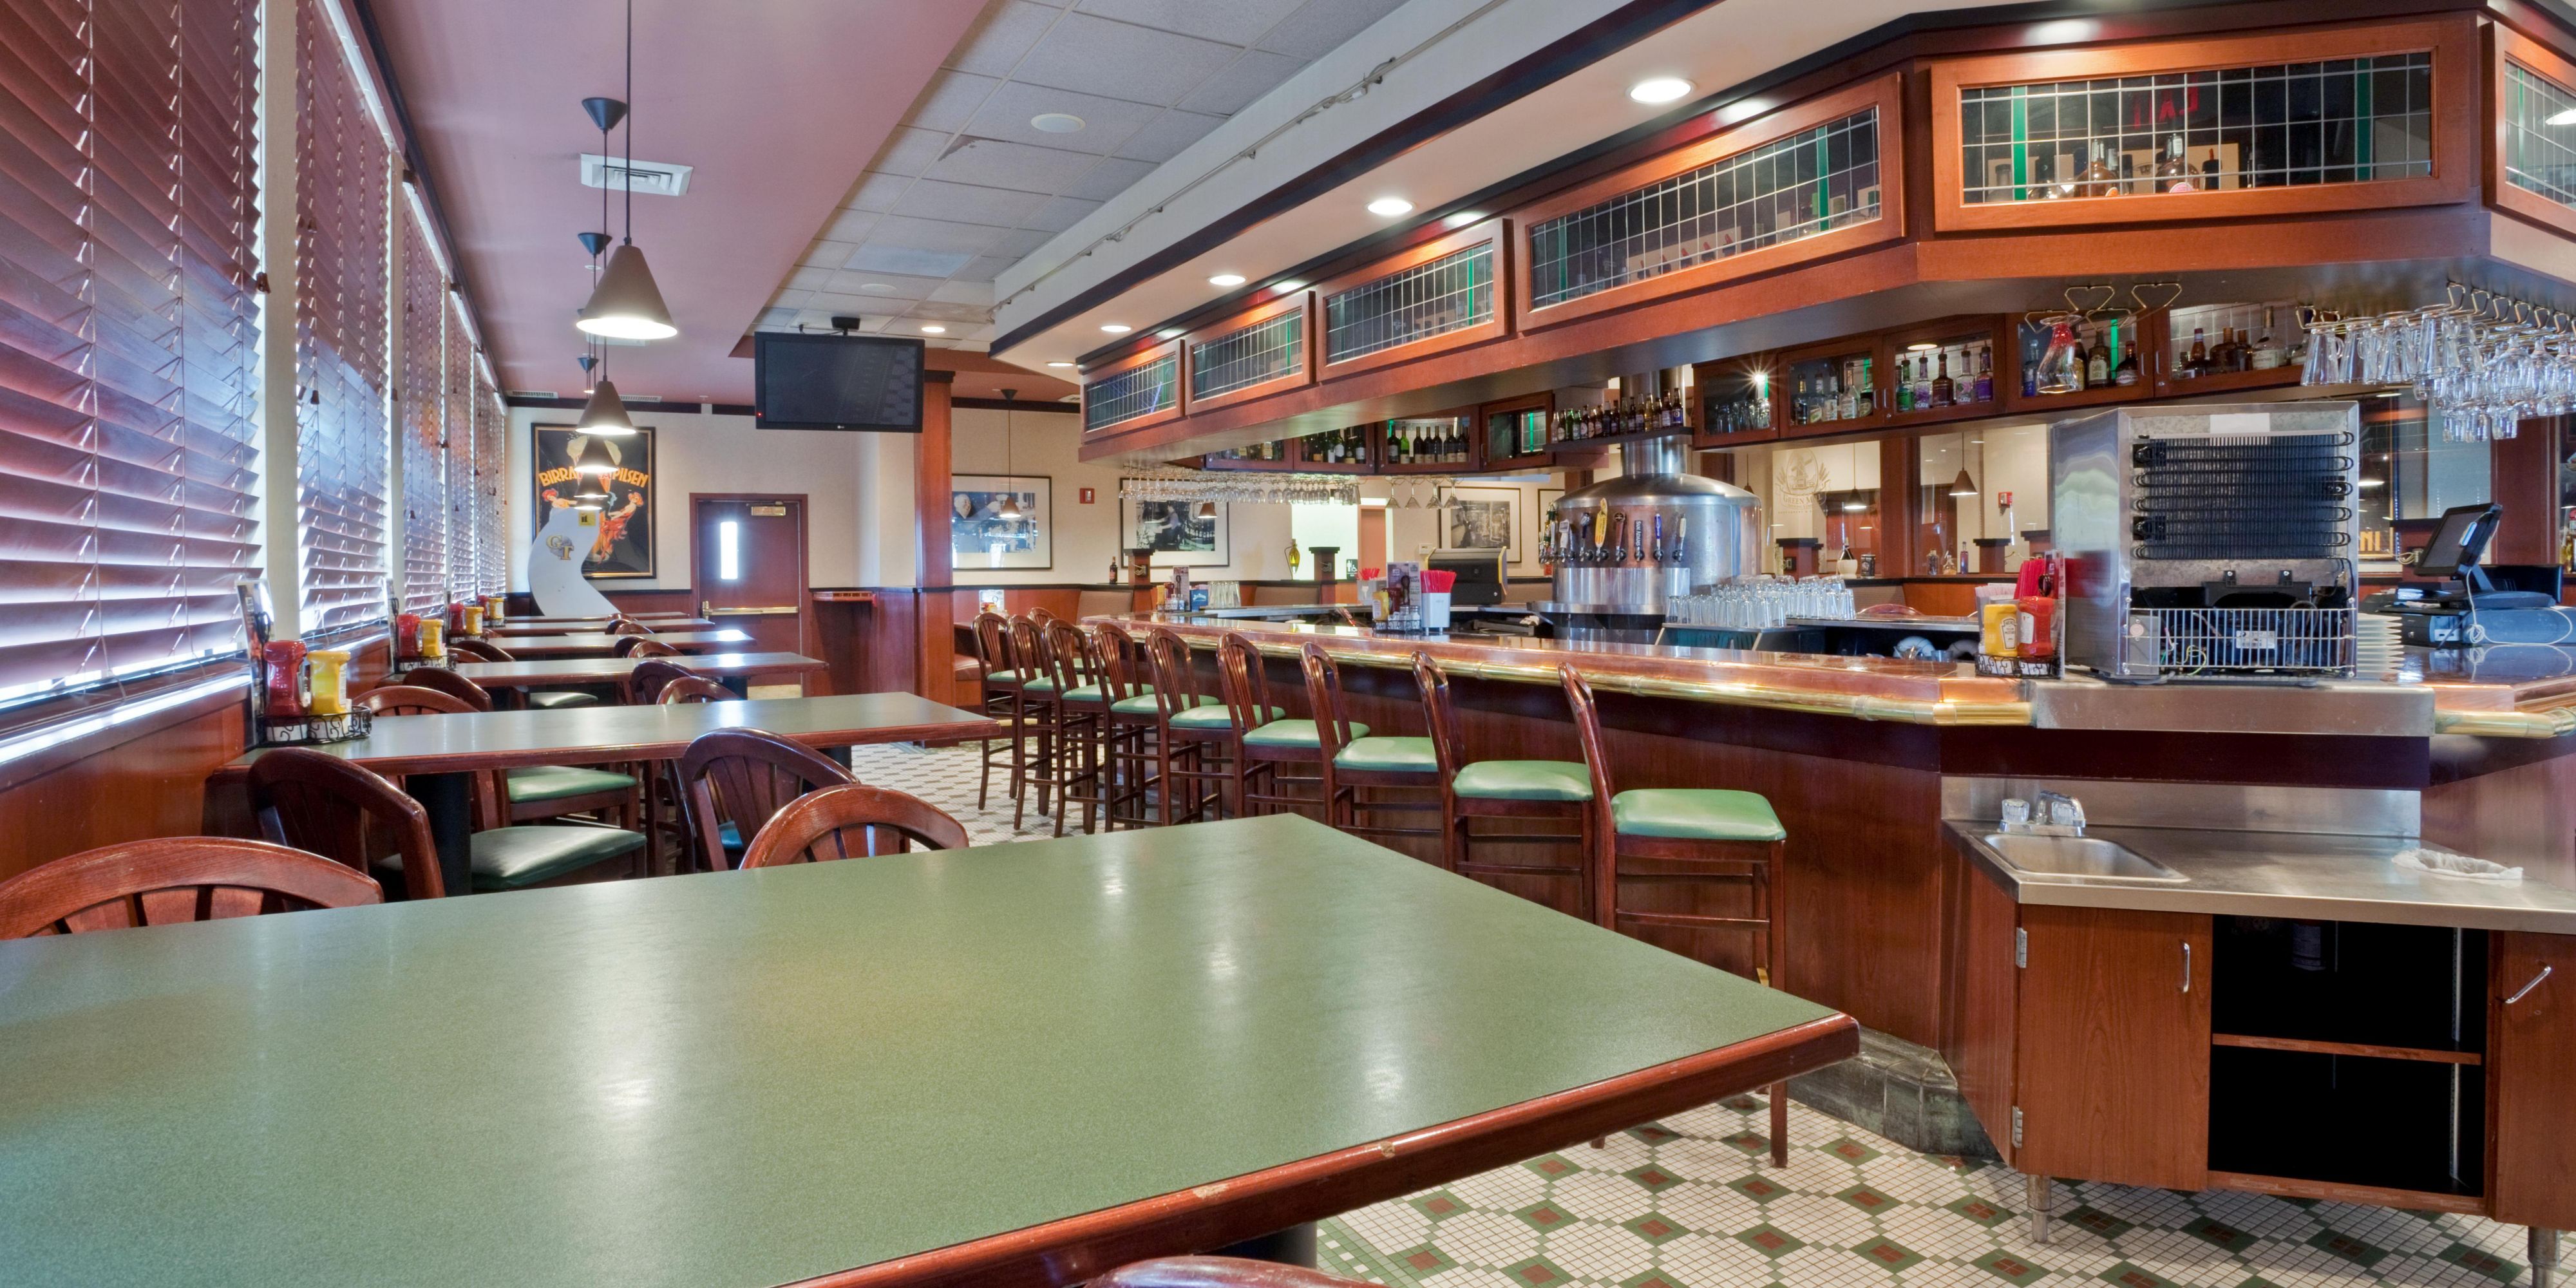 Enjoy craft beers and American cuisine at Green Mill restaurant.